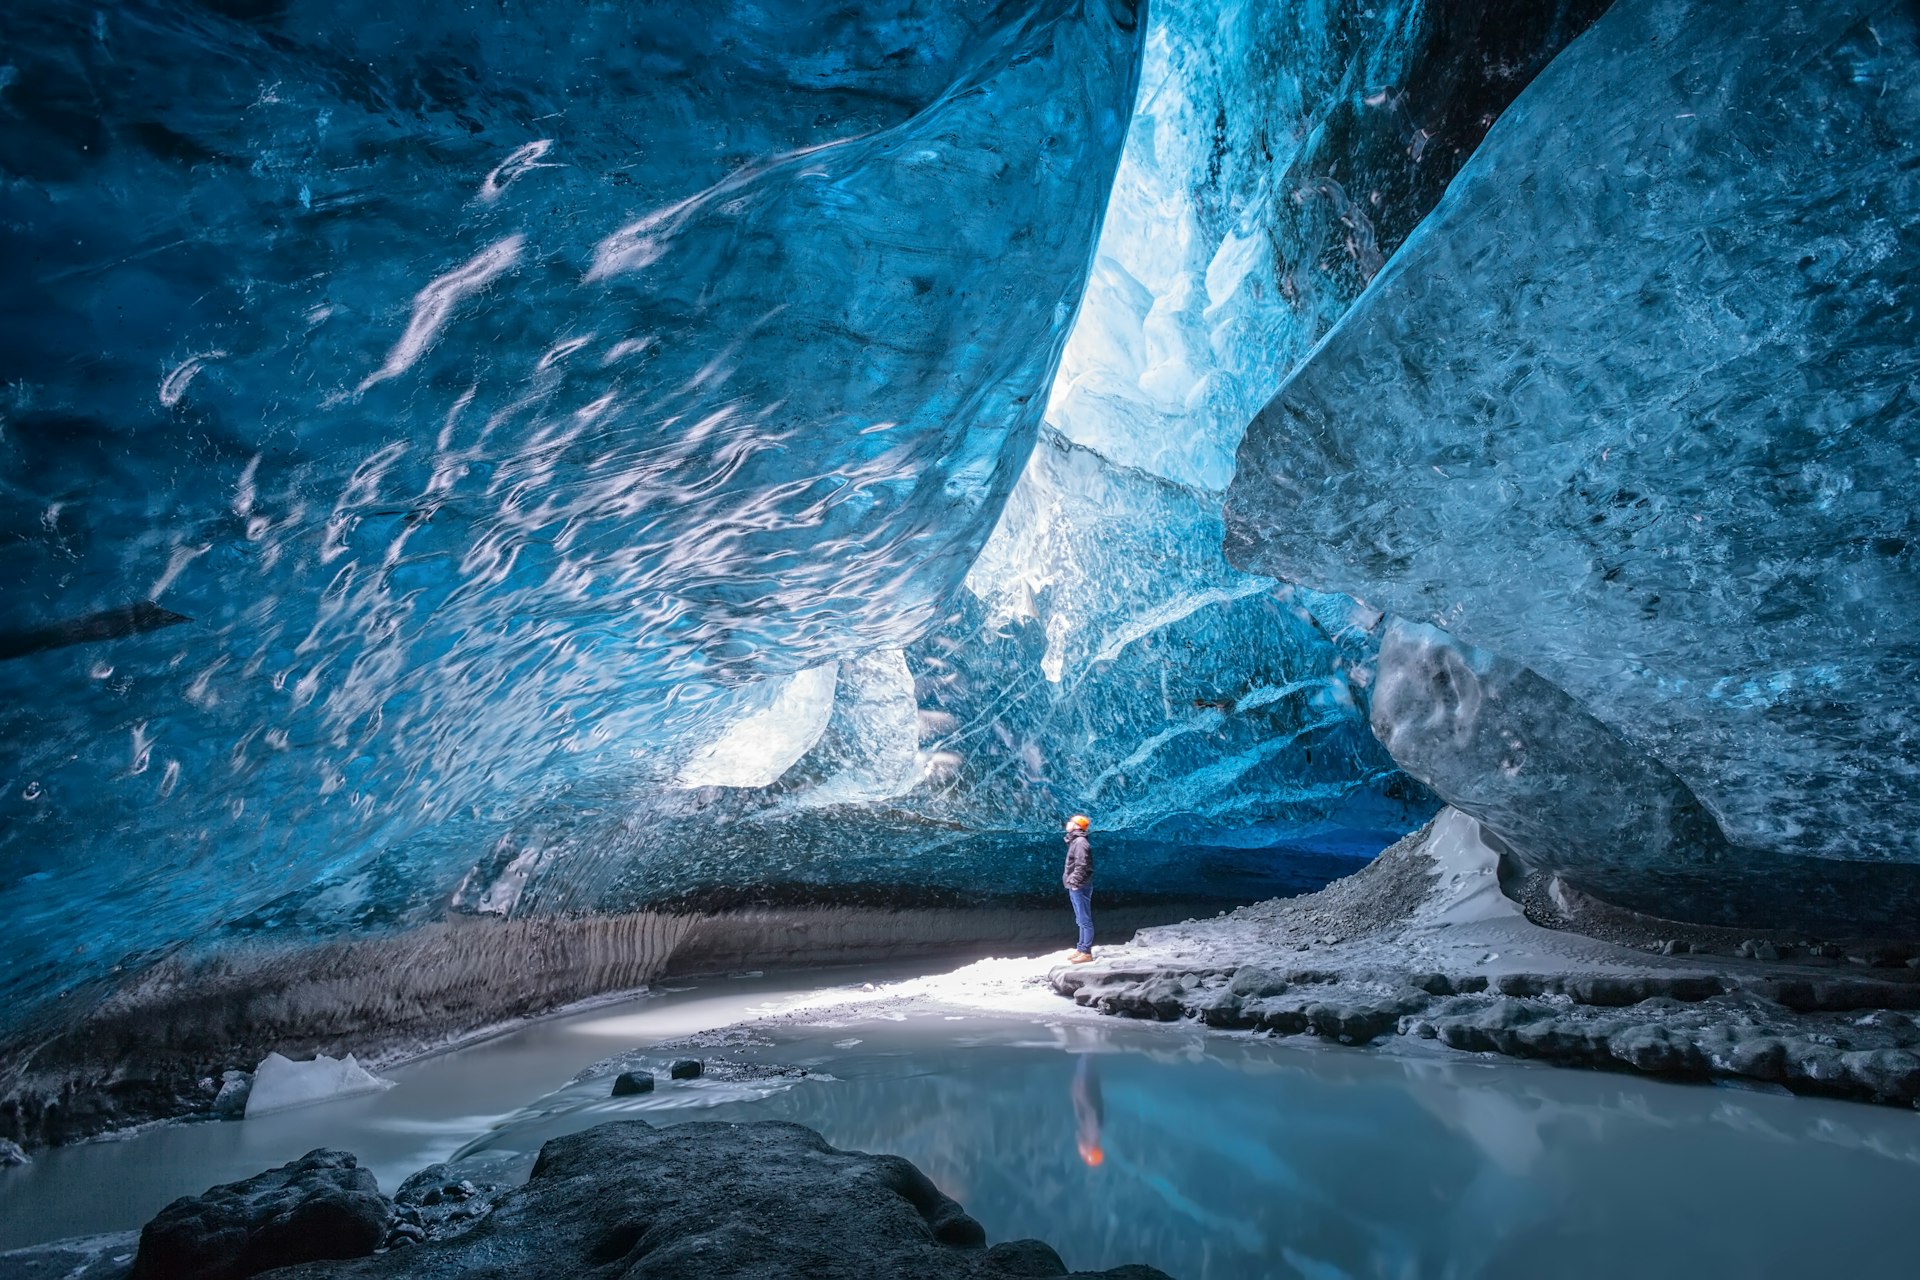 A man wearing a helmet stands in an ice cave gazing at the strange light that surrounds him